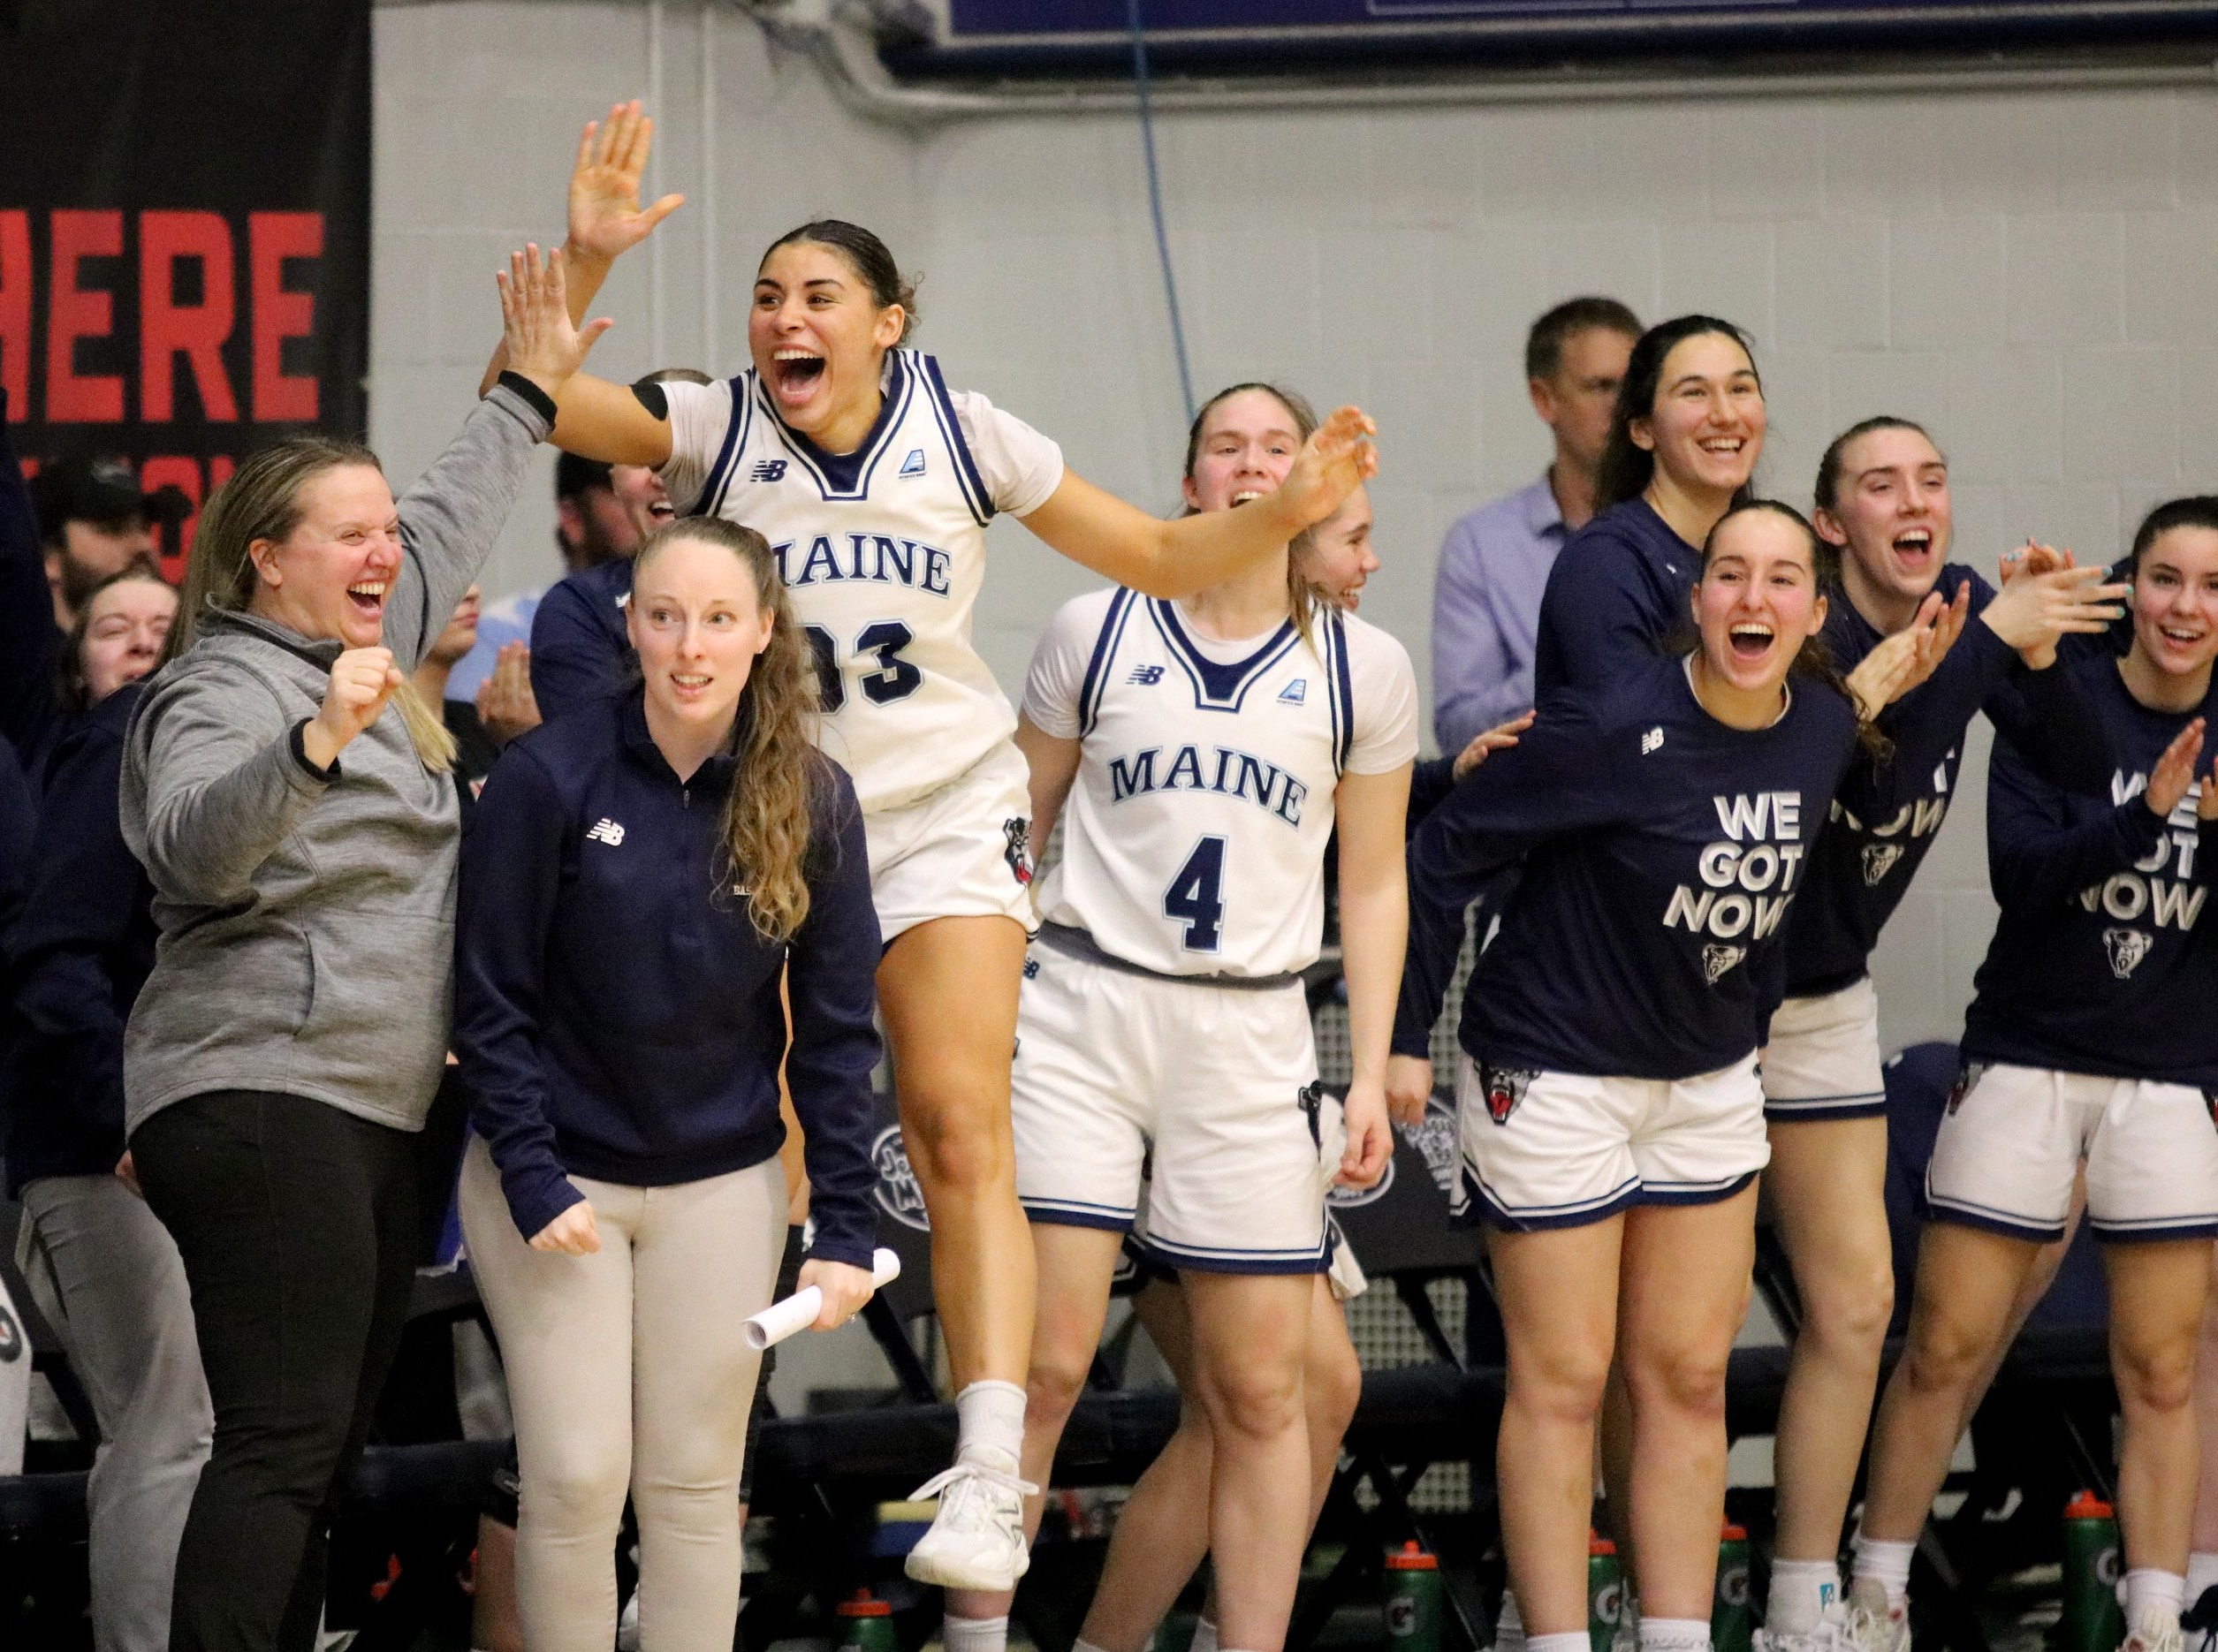 UMaine to play against Ohio State in opening round of NCAA women’s tournament